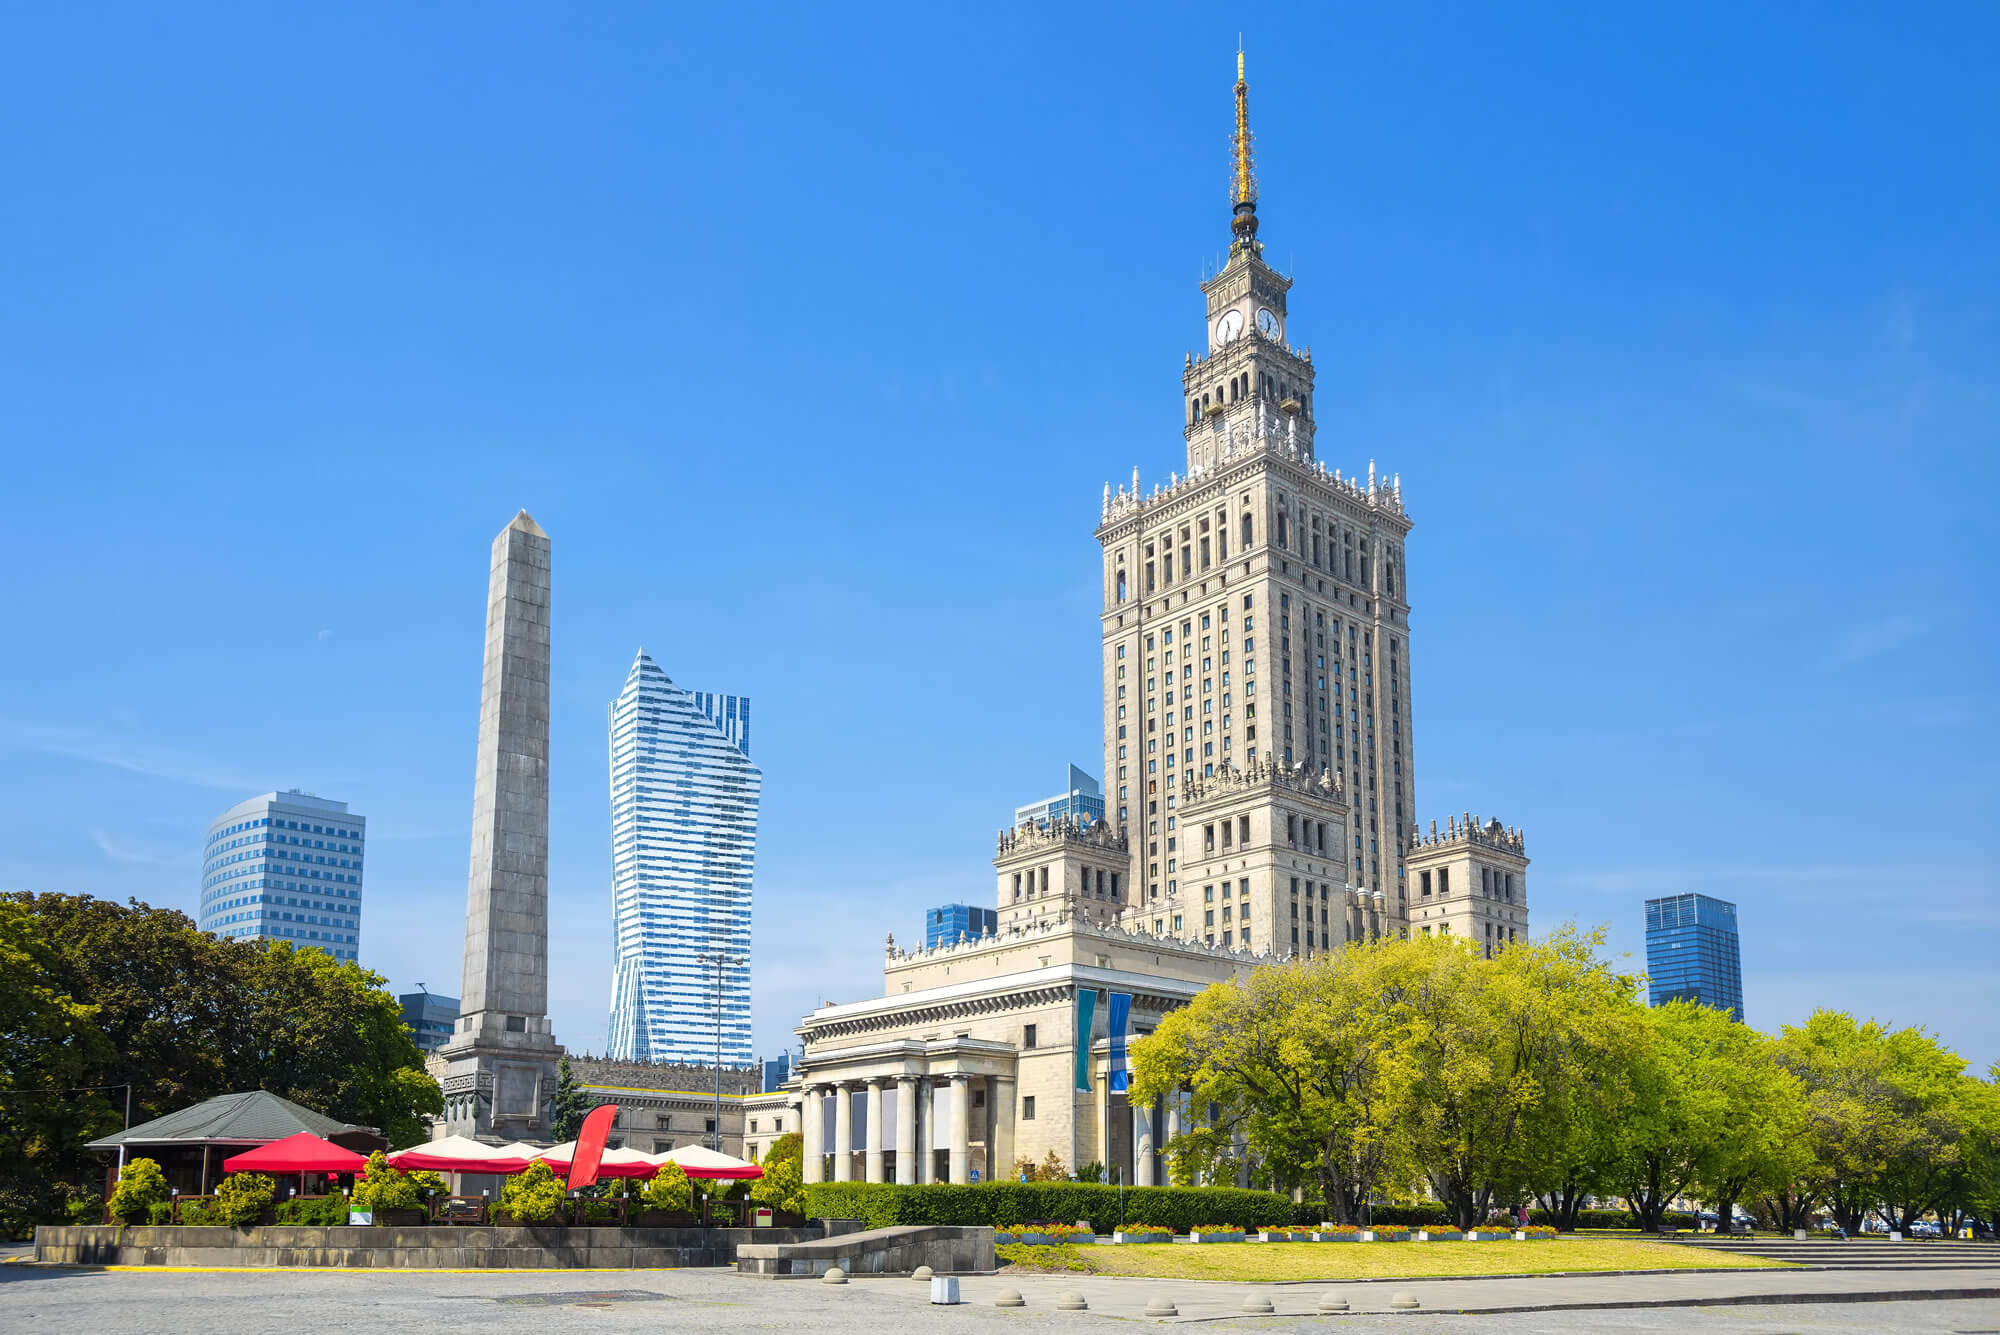 Warsaw Palace of Culture and Science